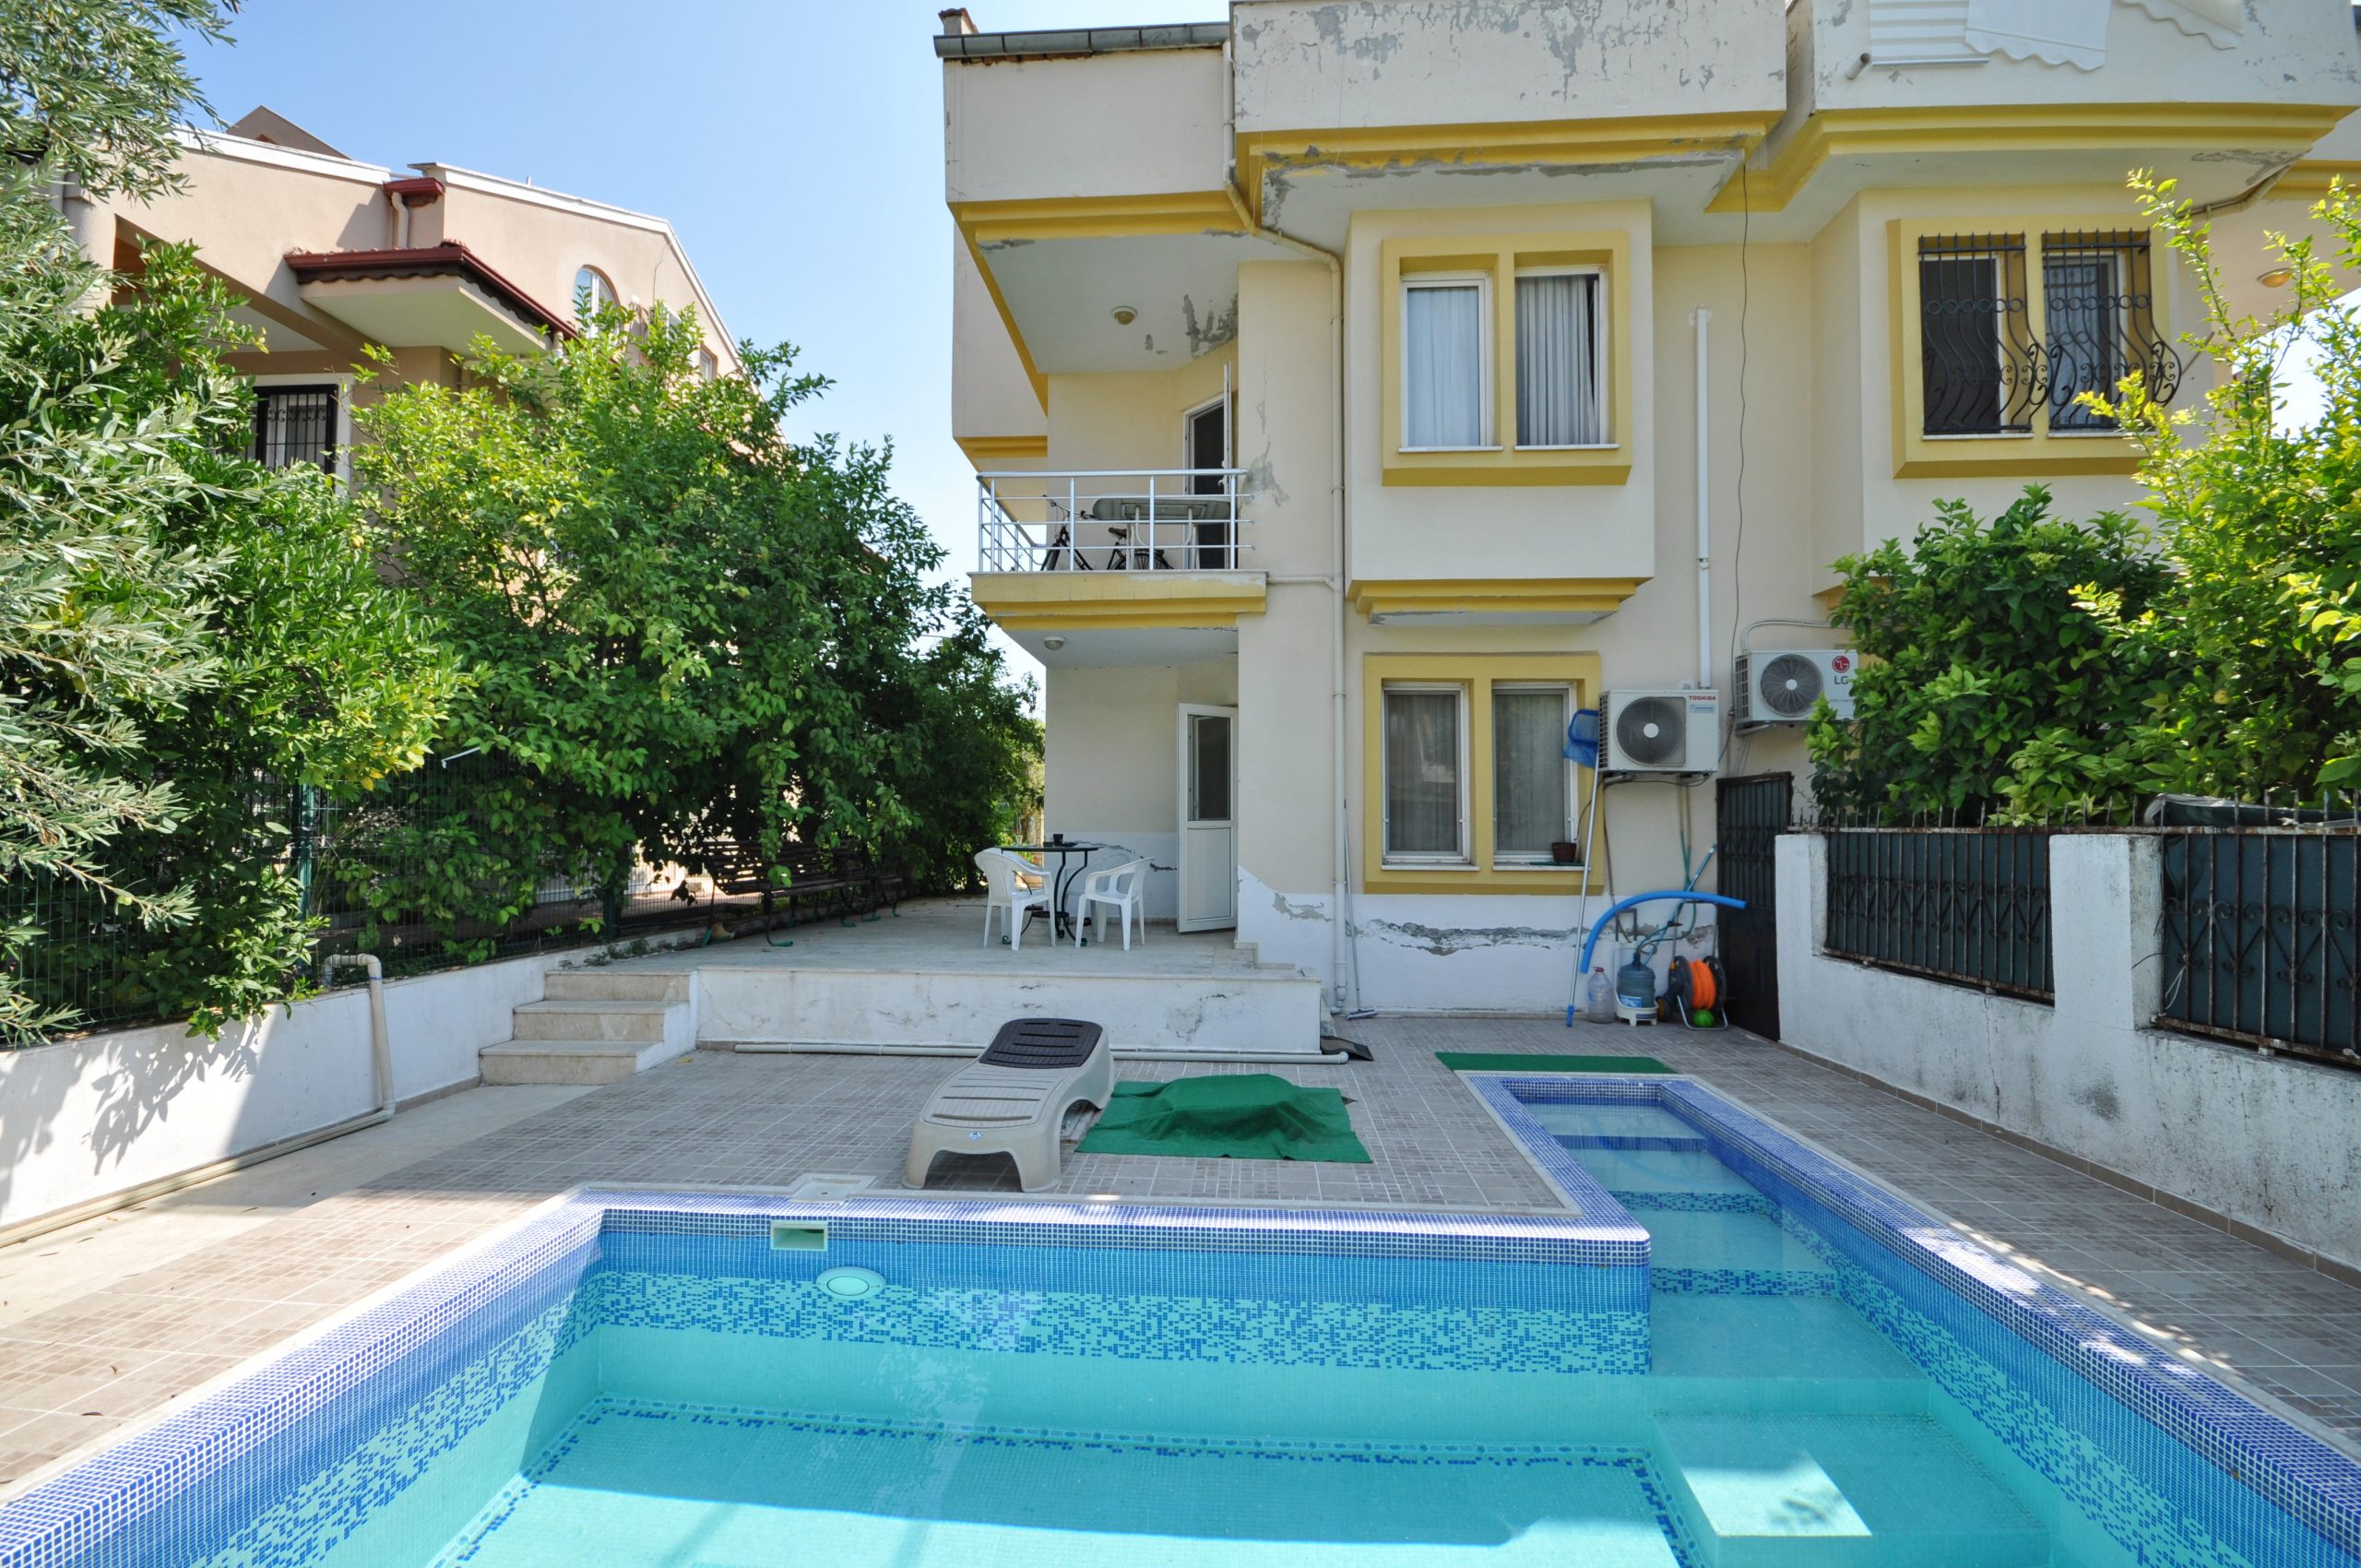 4 Bedroom Semi Detached Villa with Private Pool in Fethiye